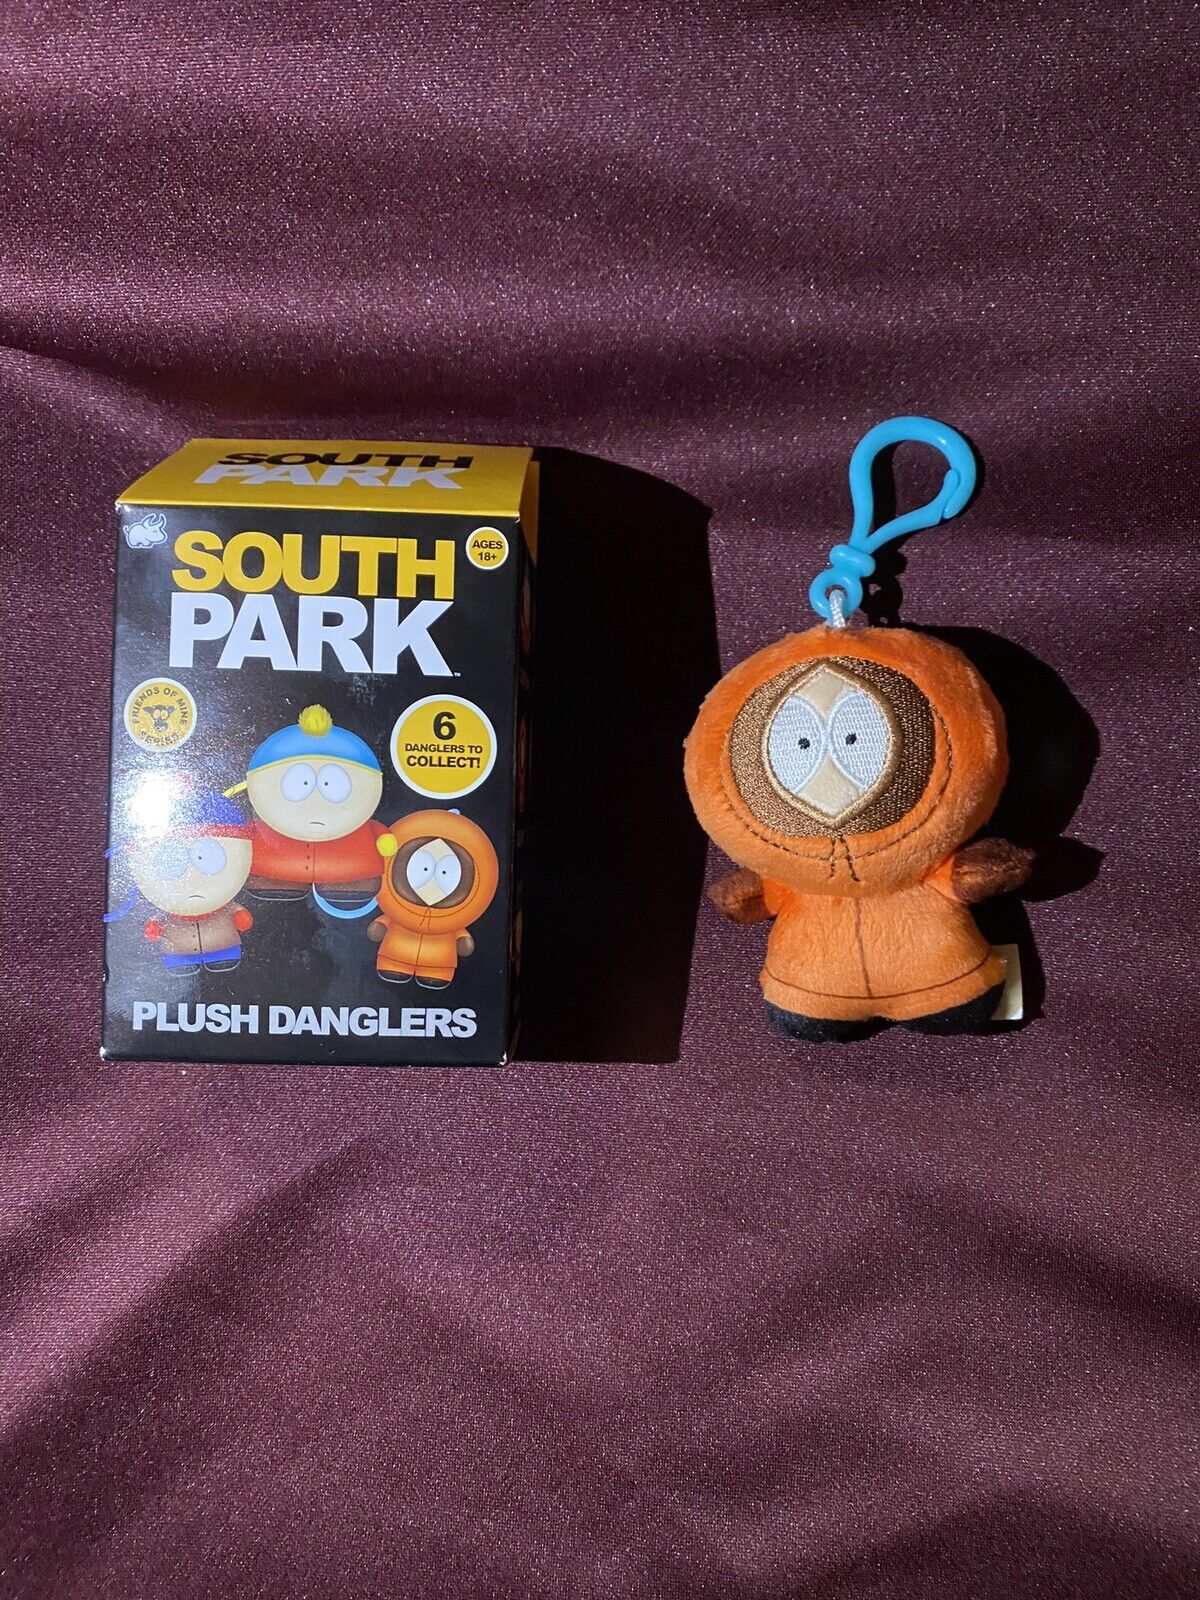 South Park Plush Danglers Kenny Friends Of Mine Series. Bullsitoy. New